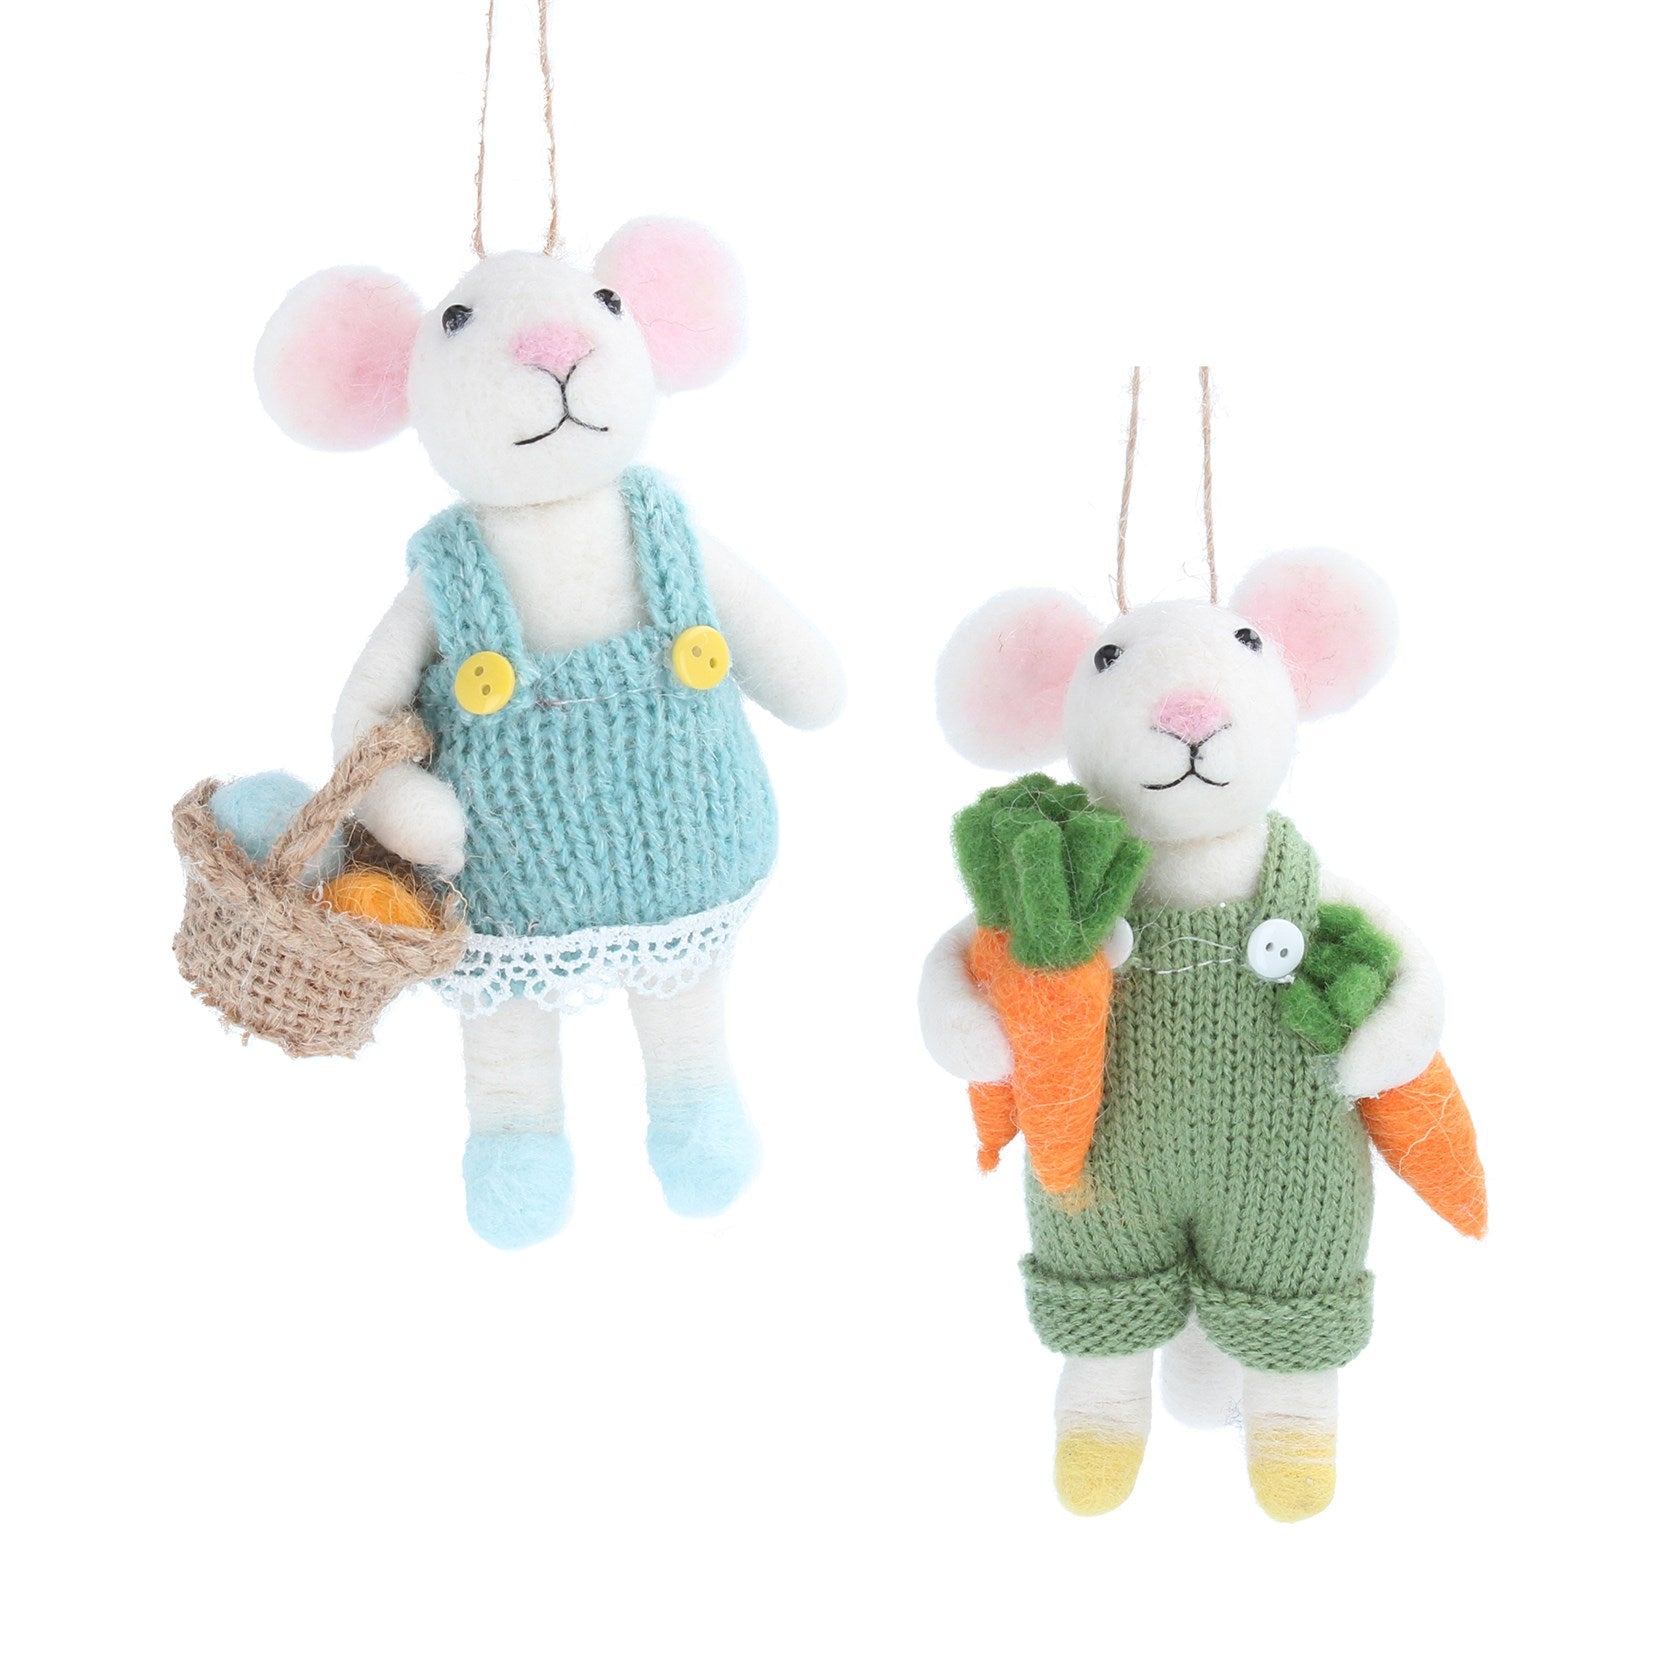 Mr & Mrs Knitted Mouse